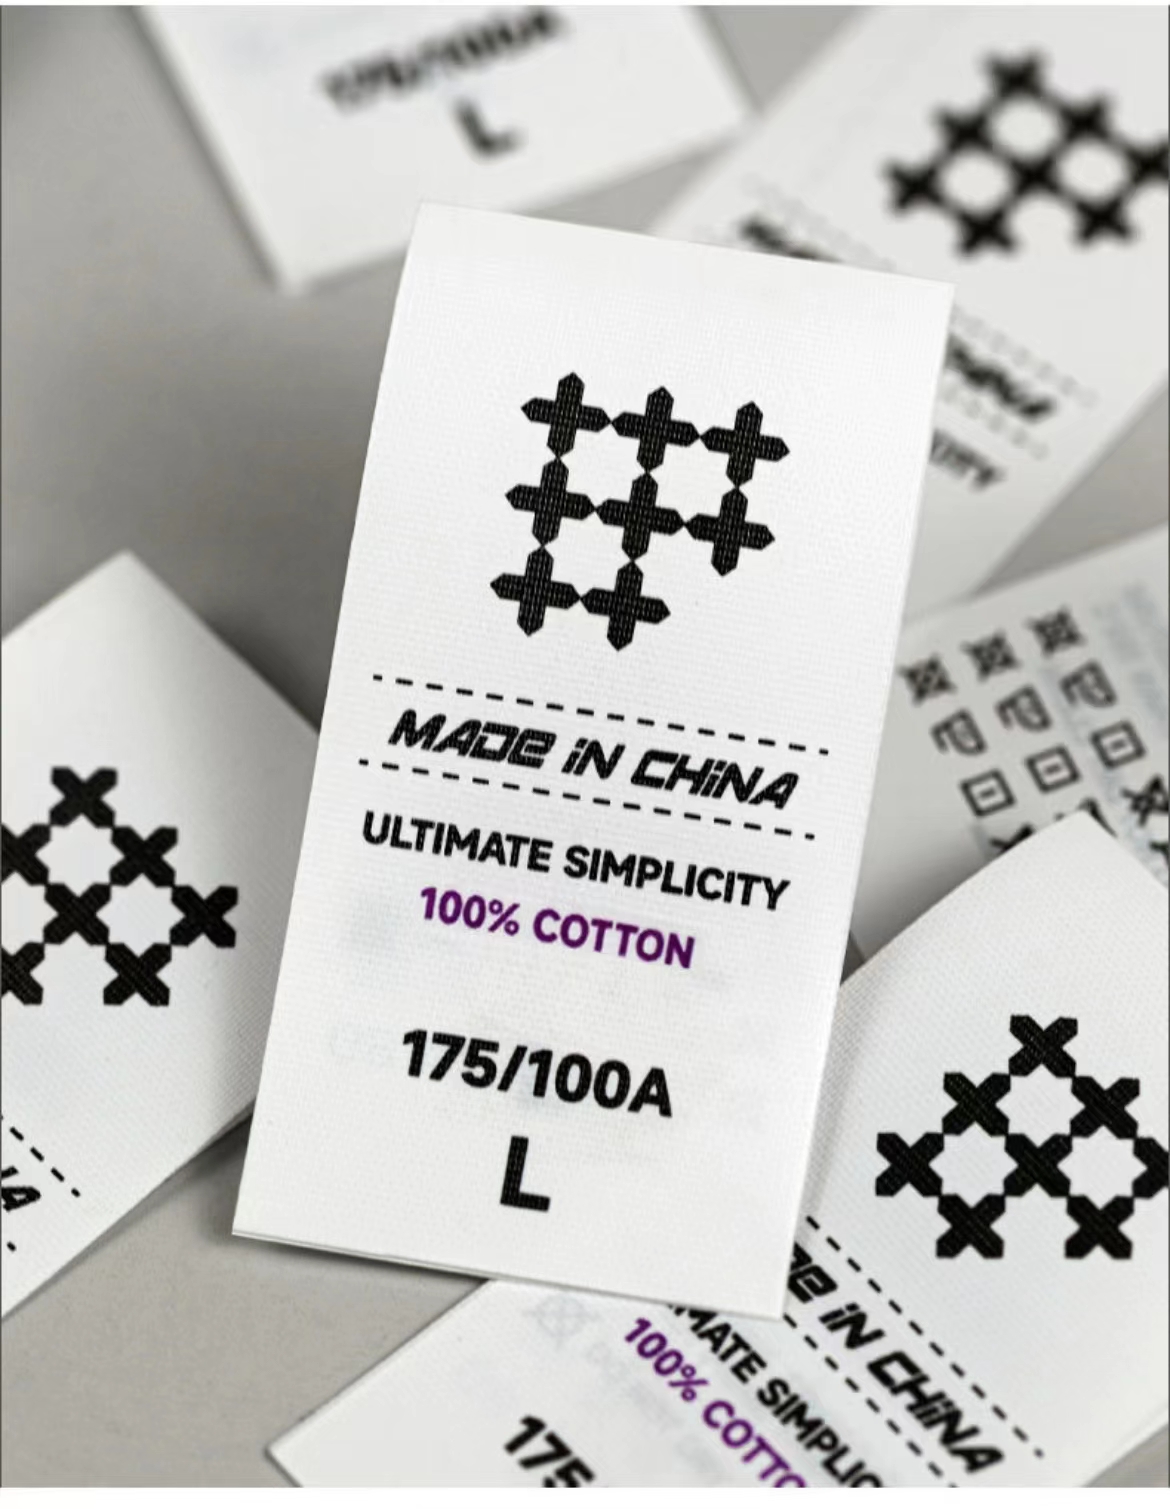 Woven Clothing Labels custom